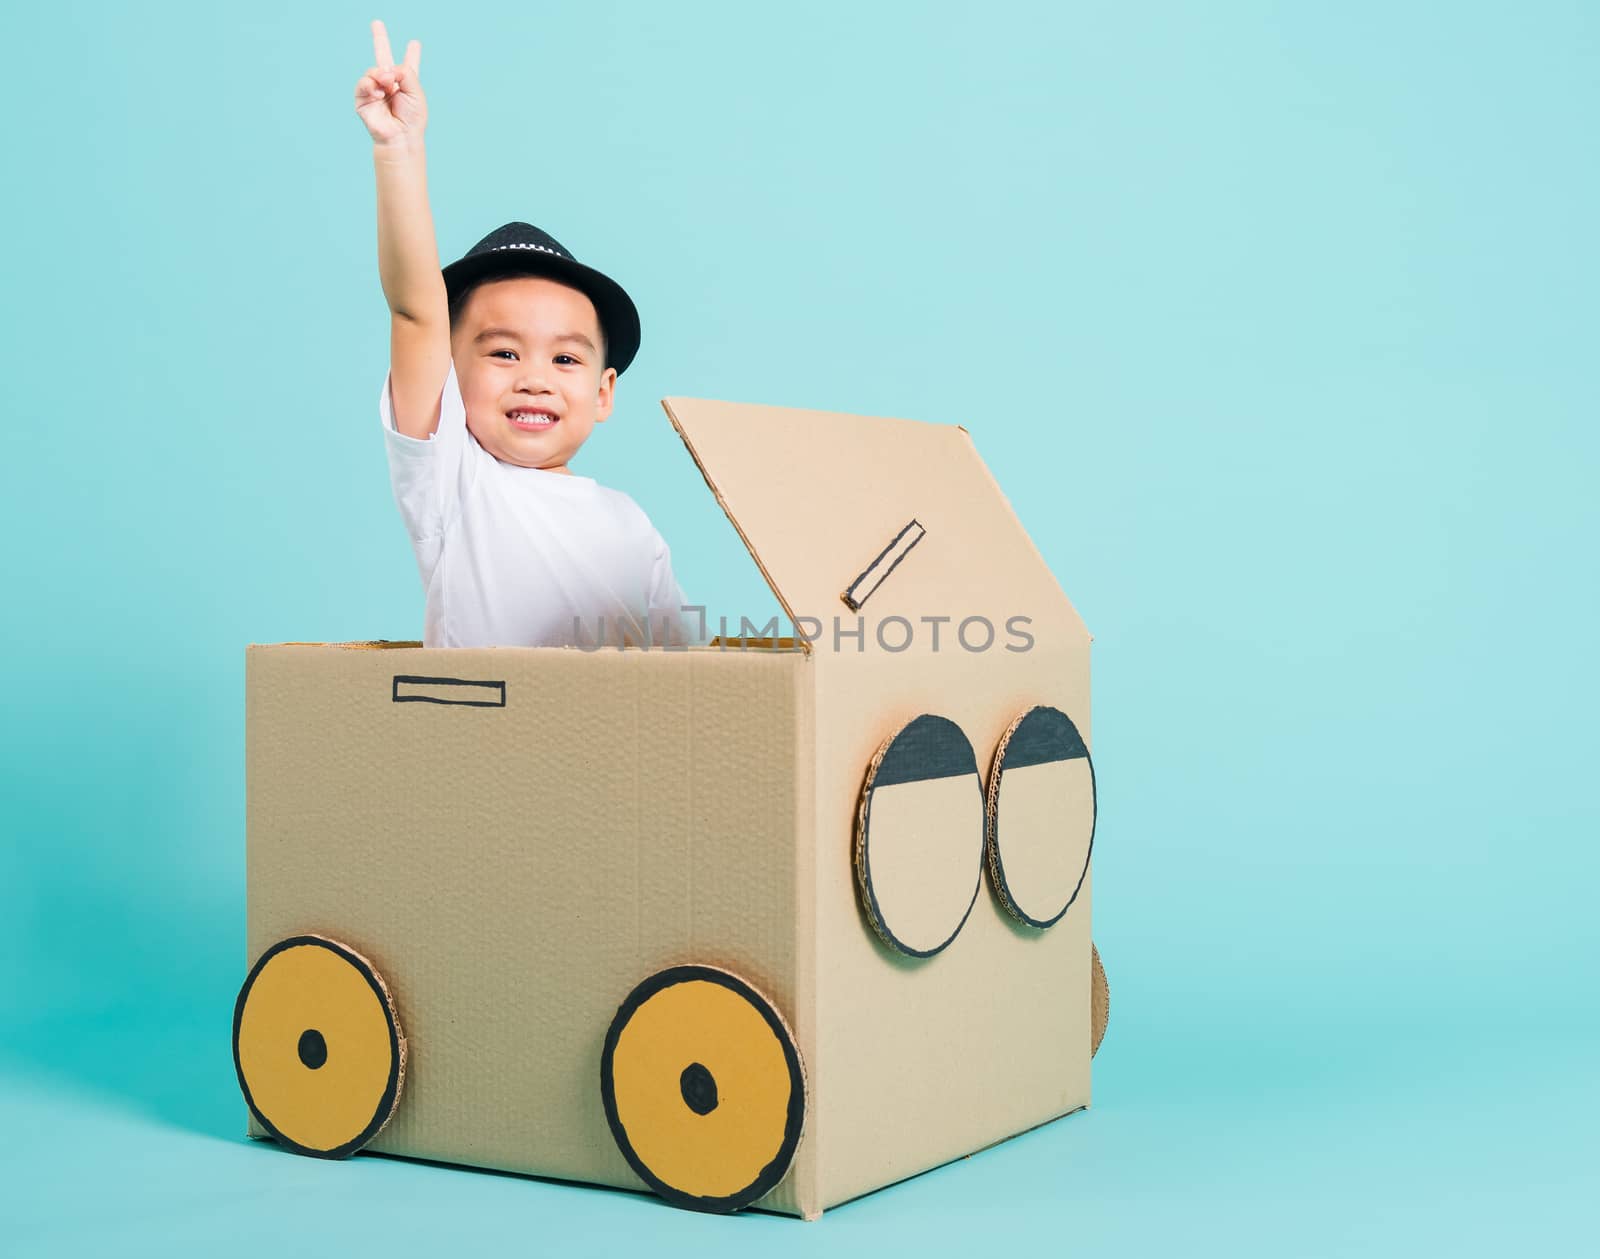 Baby children boy smile in driving play car creative by a cardbo by Sorapop